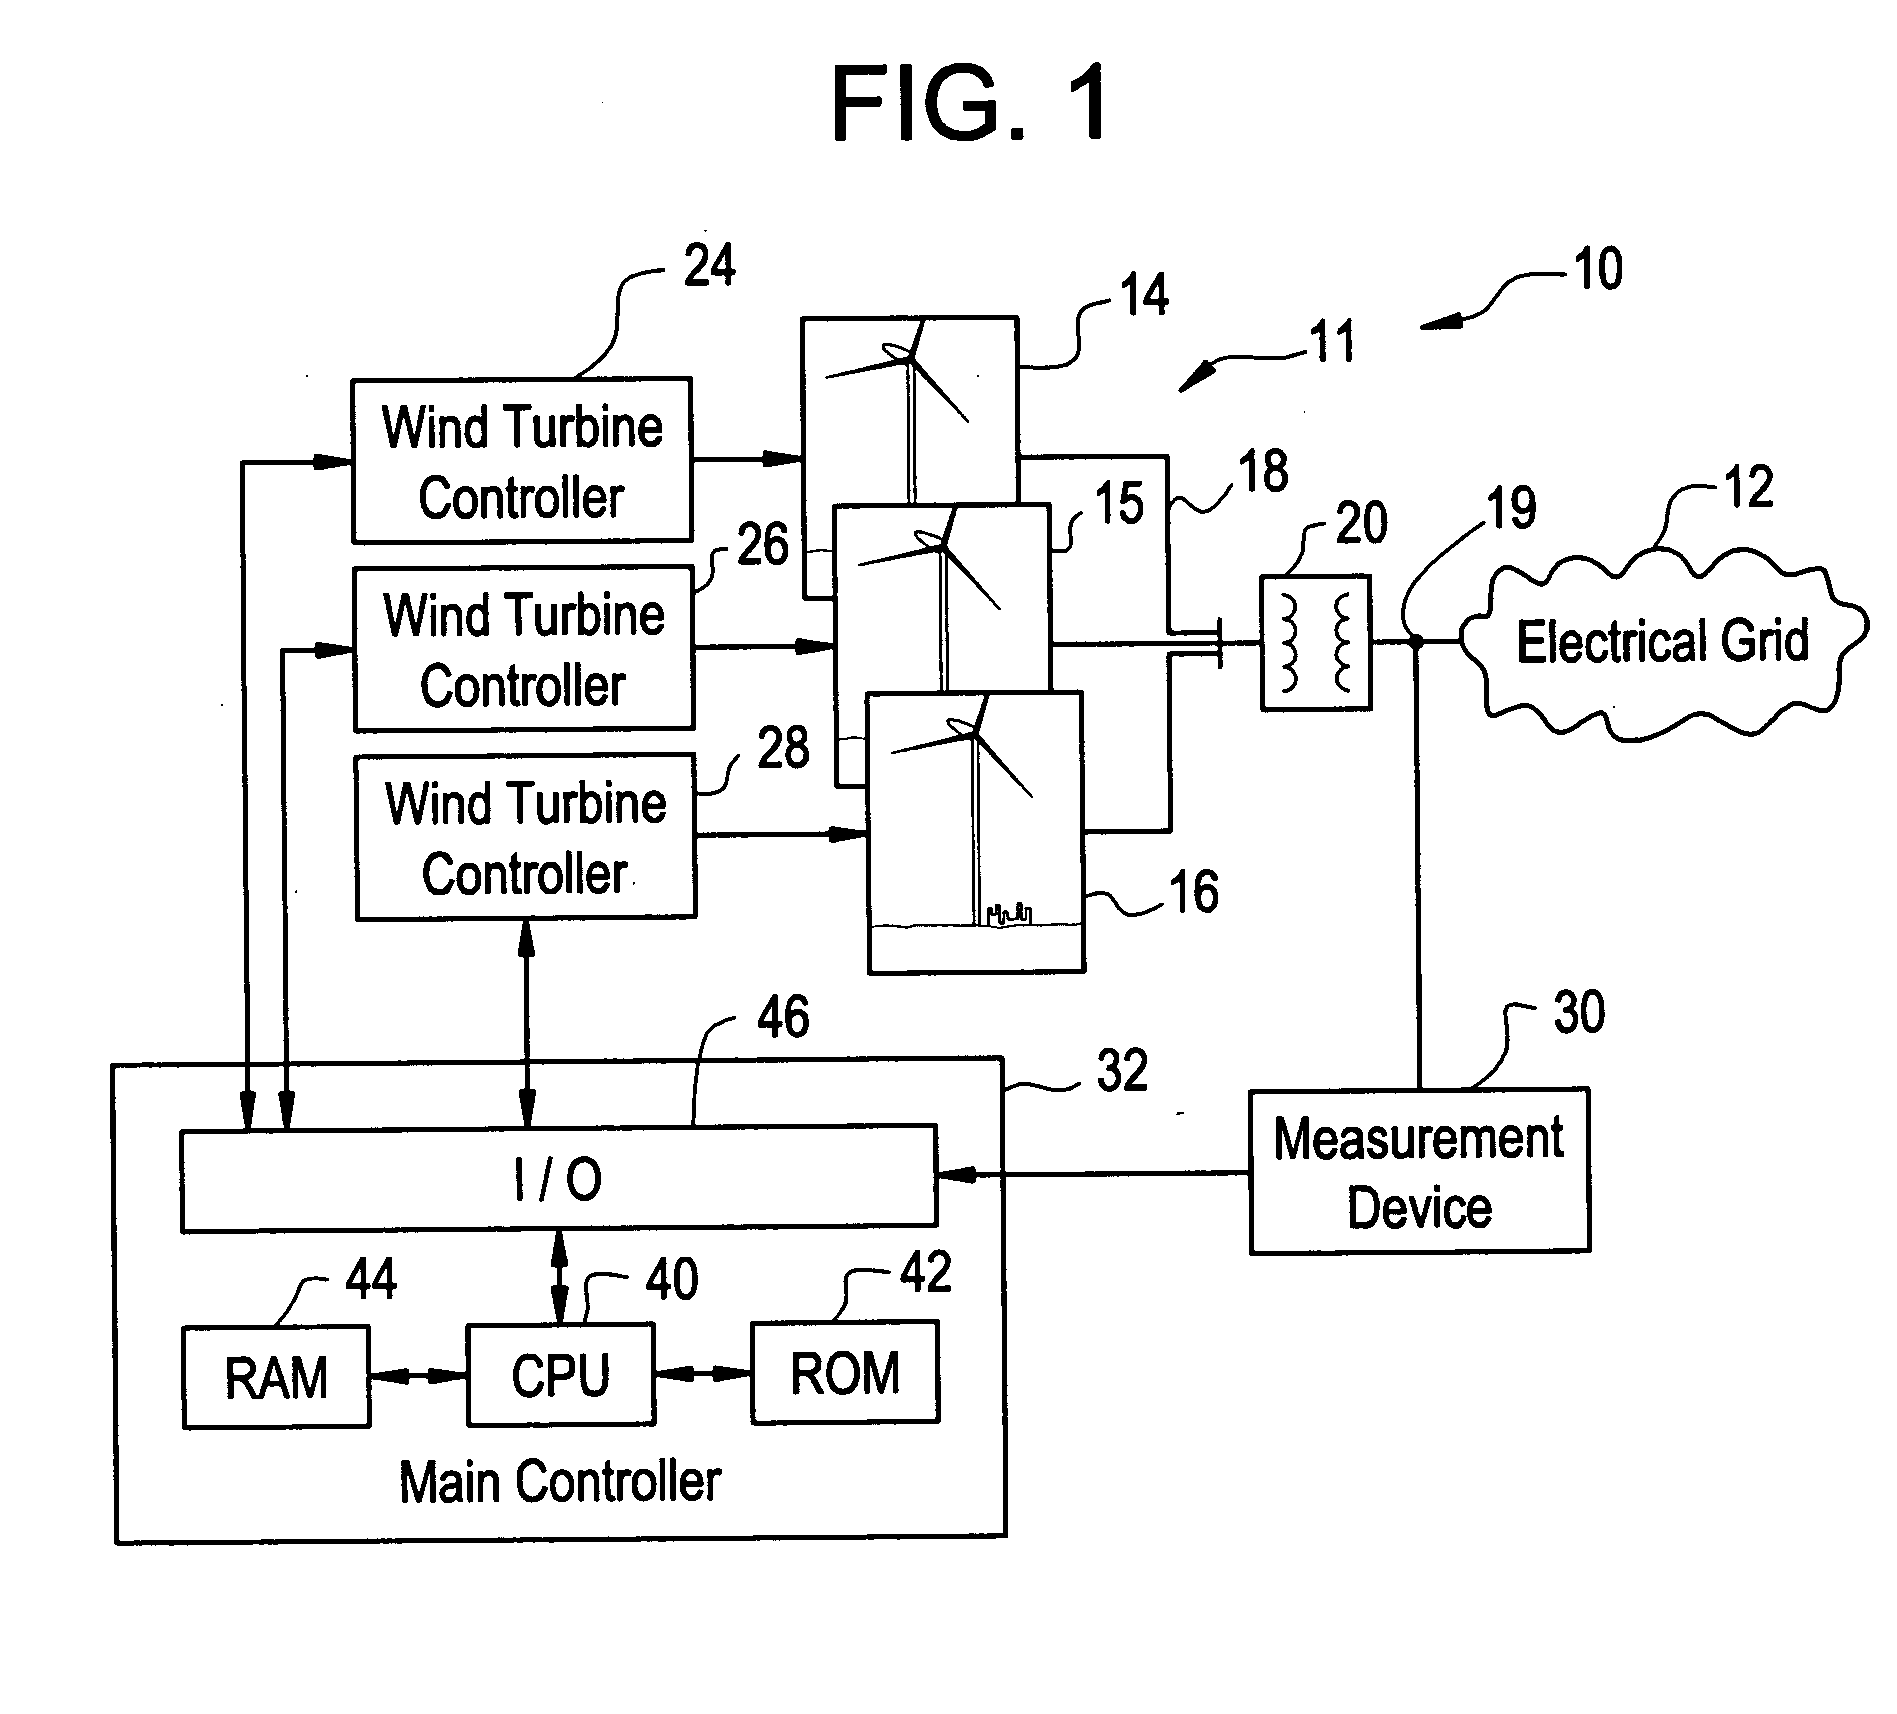 System, method, and article of manufacture for controlling operation of an electrical power generation system